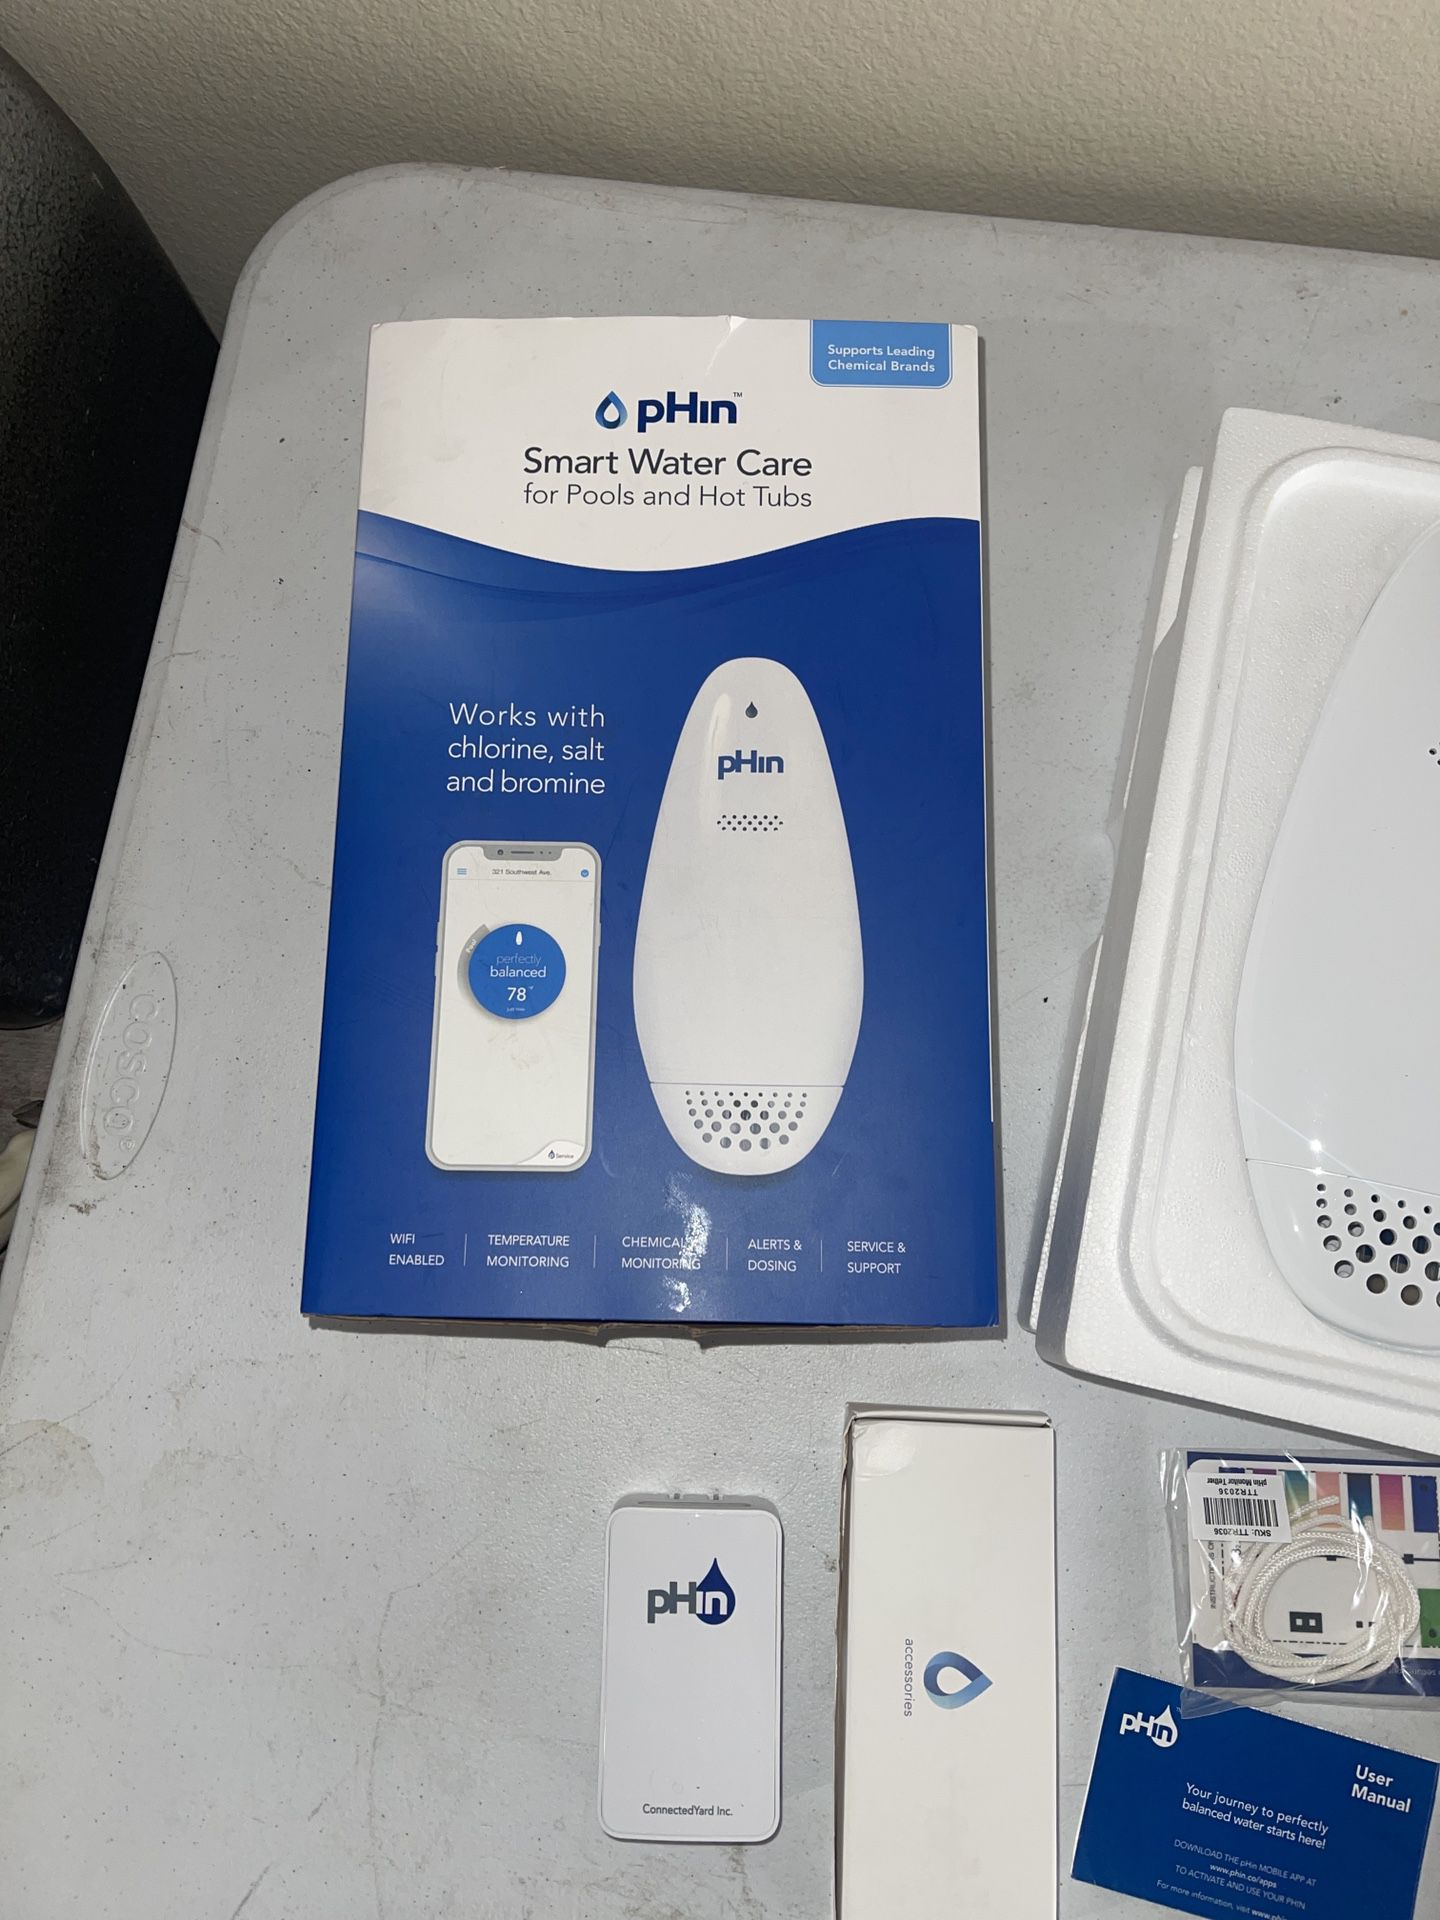 pHin Smart Water Care Monitor Pools, Hot Tubs, Spa model number CY-PM1510-A1 👀🔥